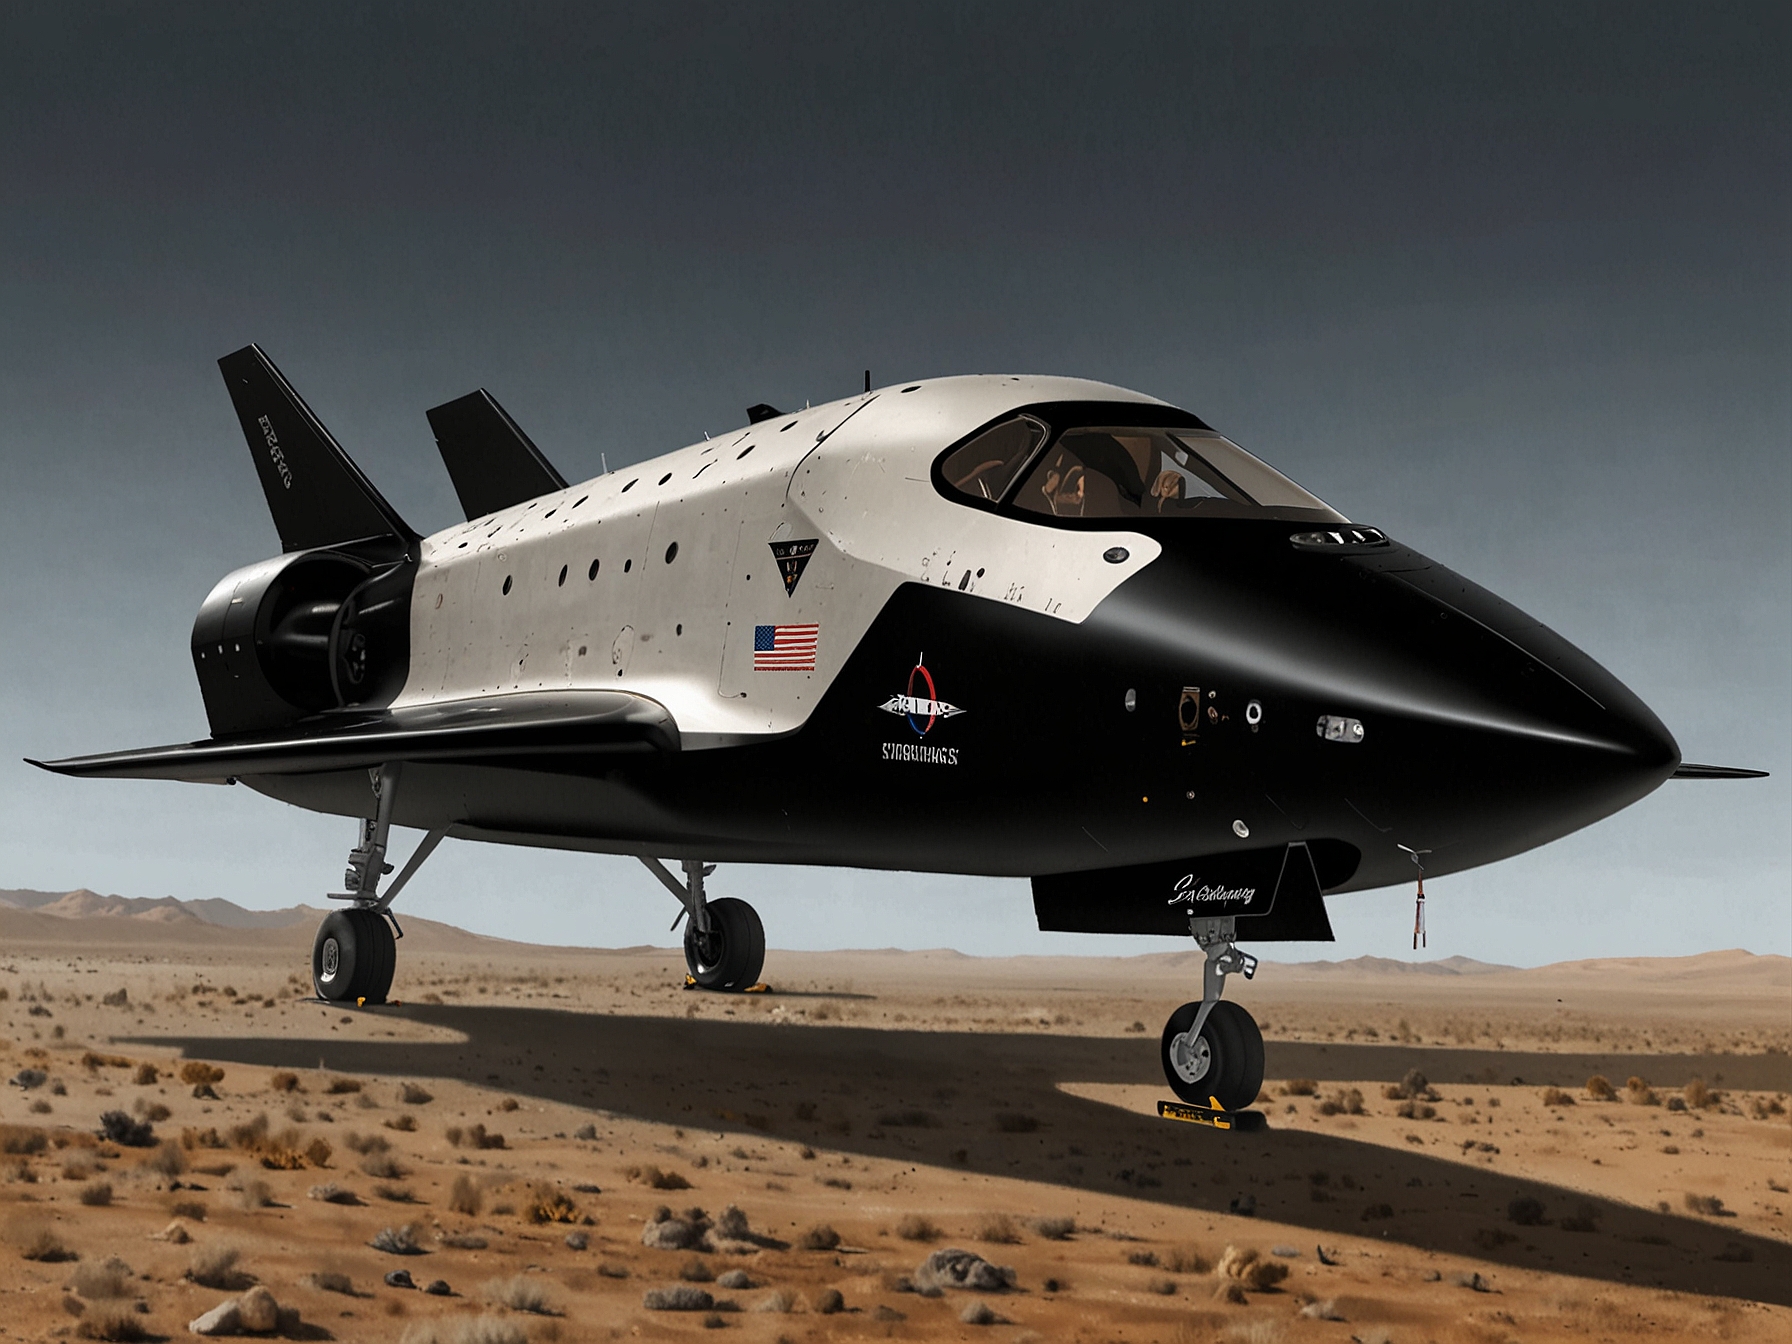 A glimpse of Sierra Space's Dream Chaser spaceplane, highlighting its innovative design and technology, underscoring the company's advancements in sustainable space missions under Tom Vice's leadership.